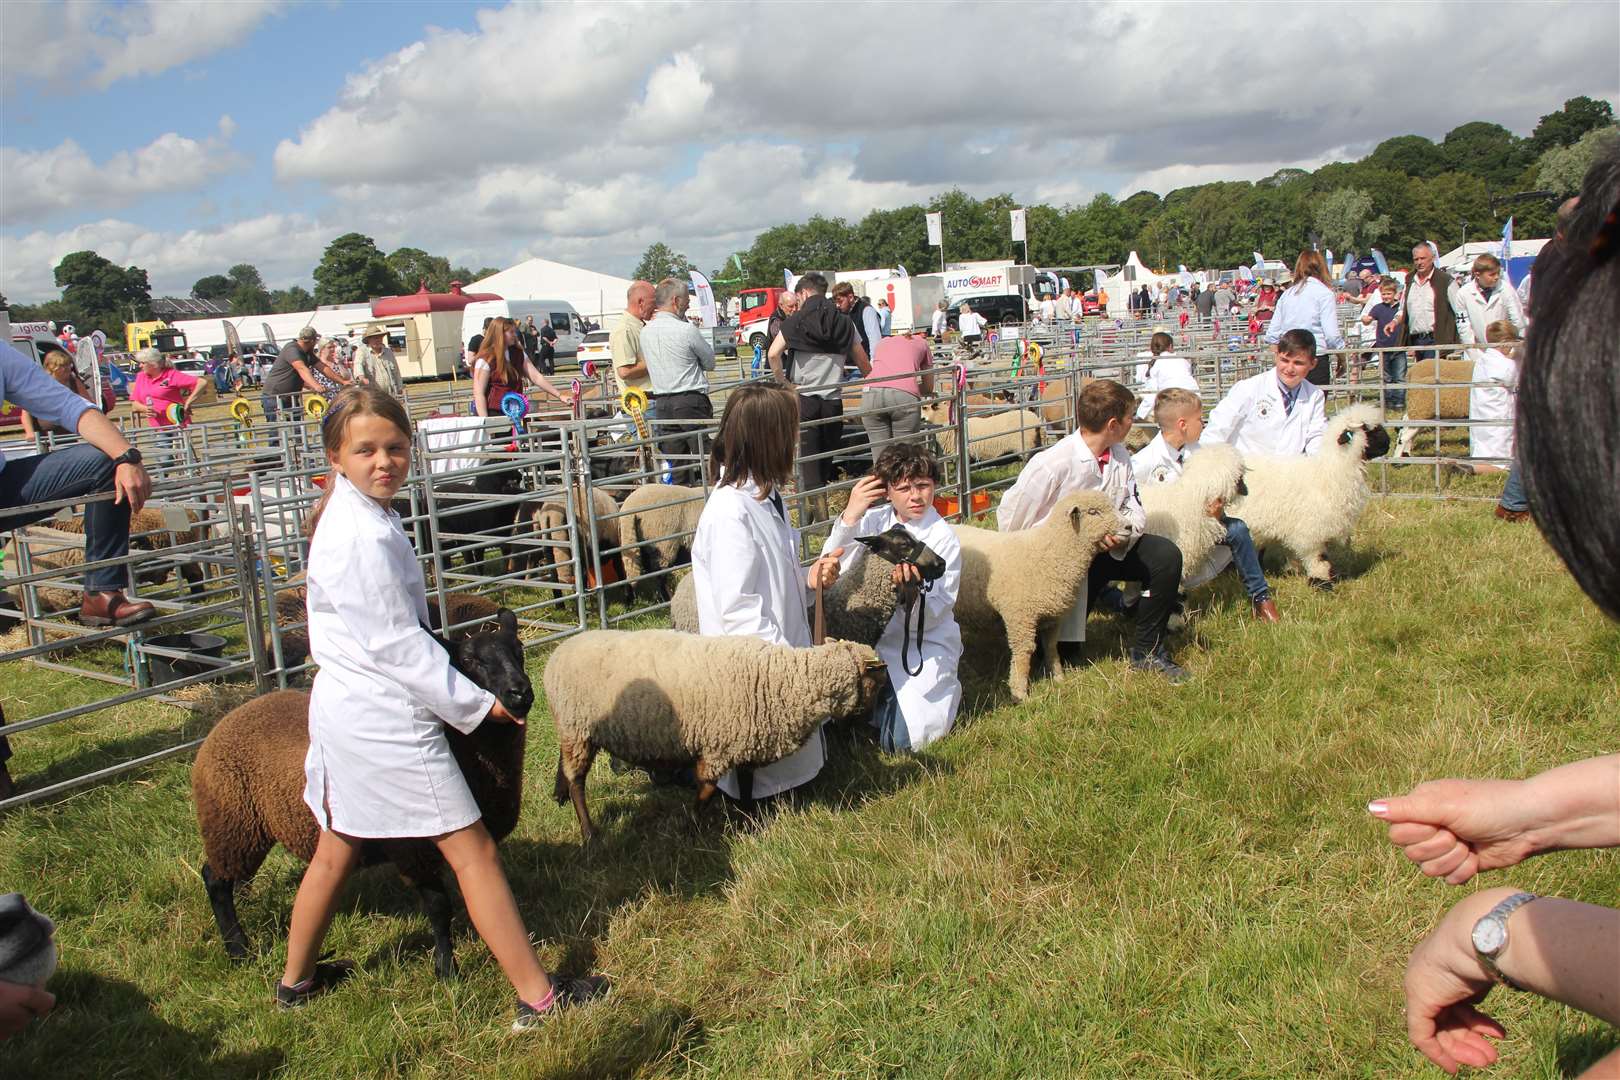 Turriff Show has received funding to improve WiFi at the show site.